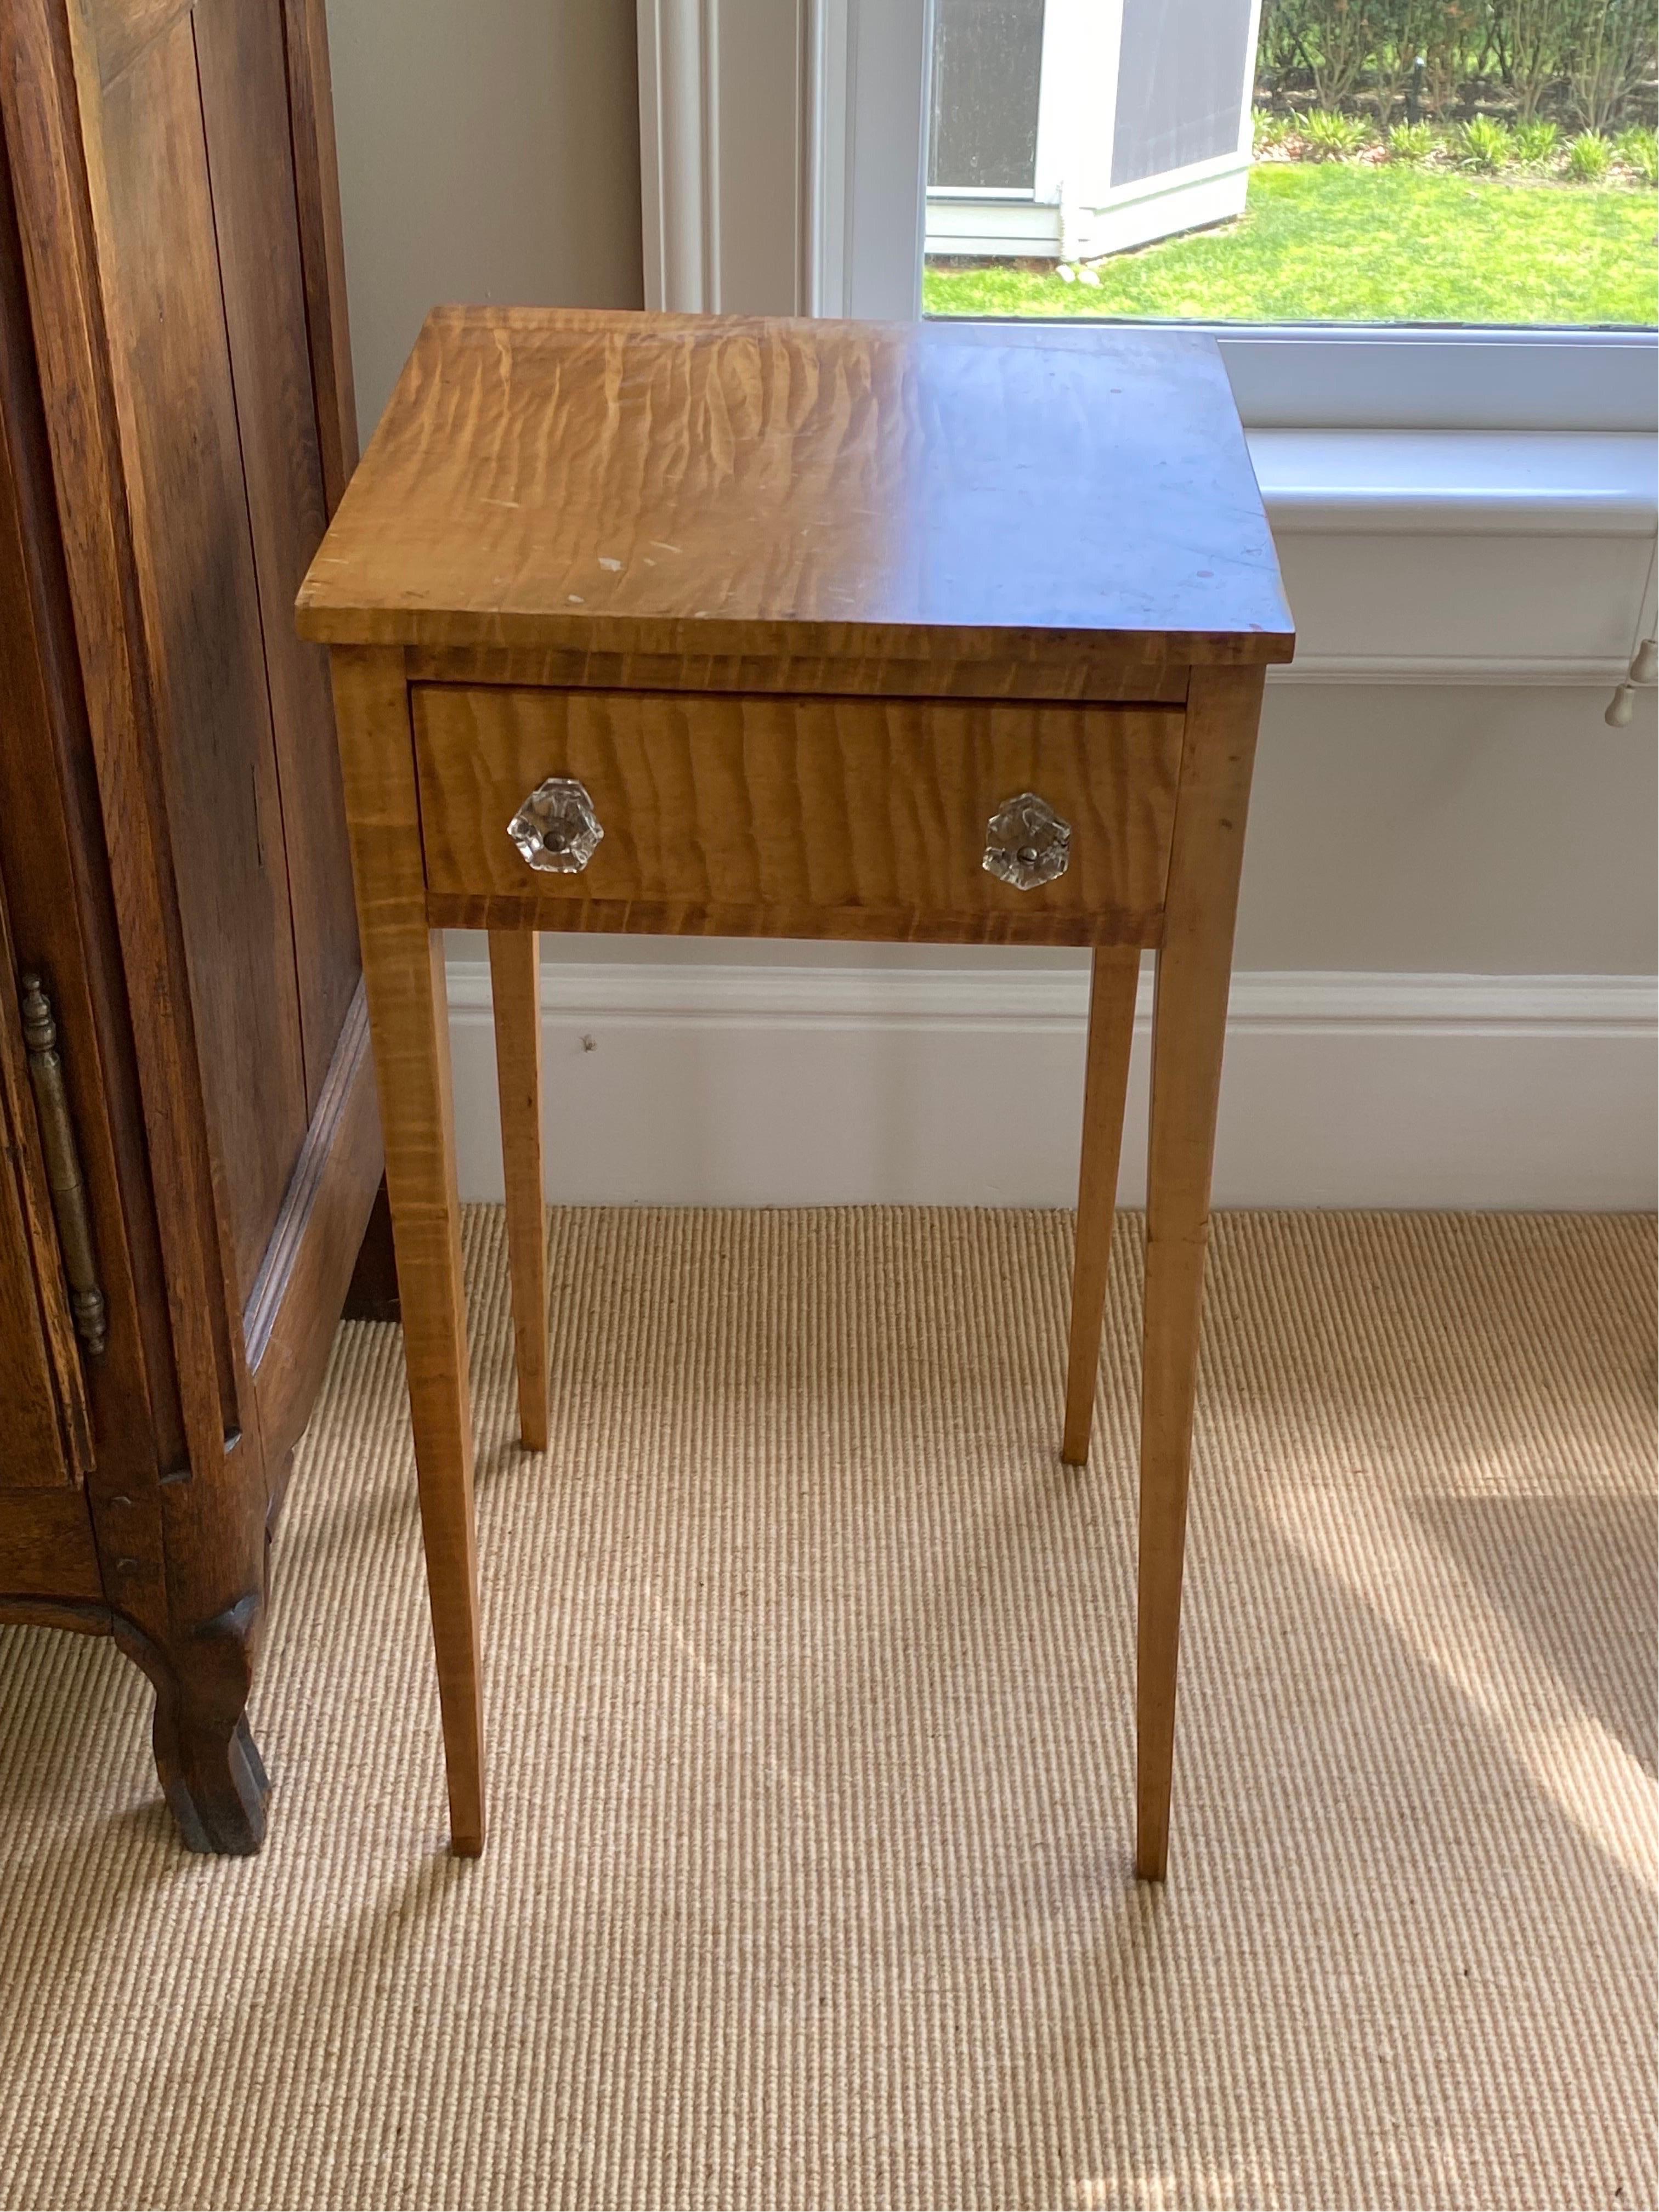 19th Century American Sheraton Tiger Maple Single Drawer Stand with Glass Knobs For Sale 1